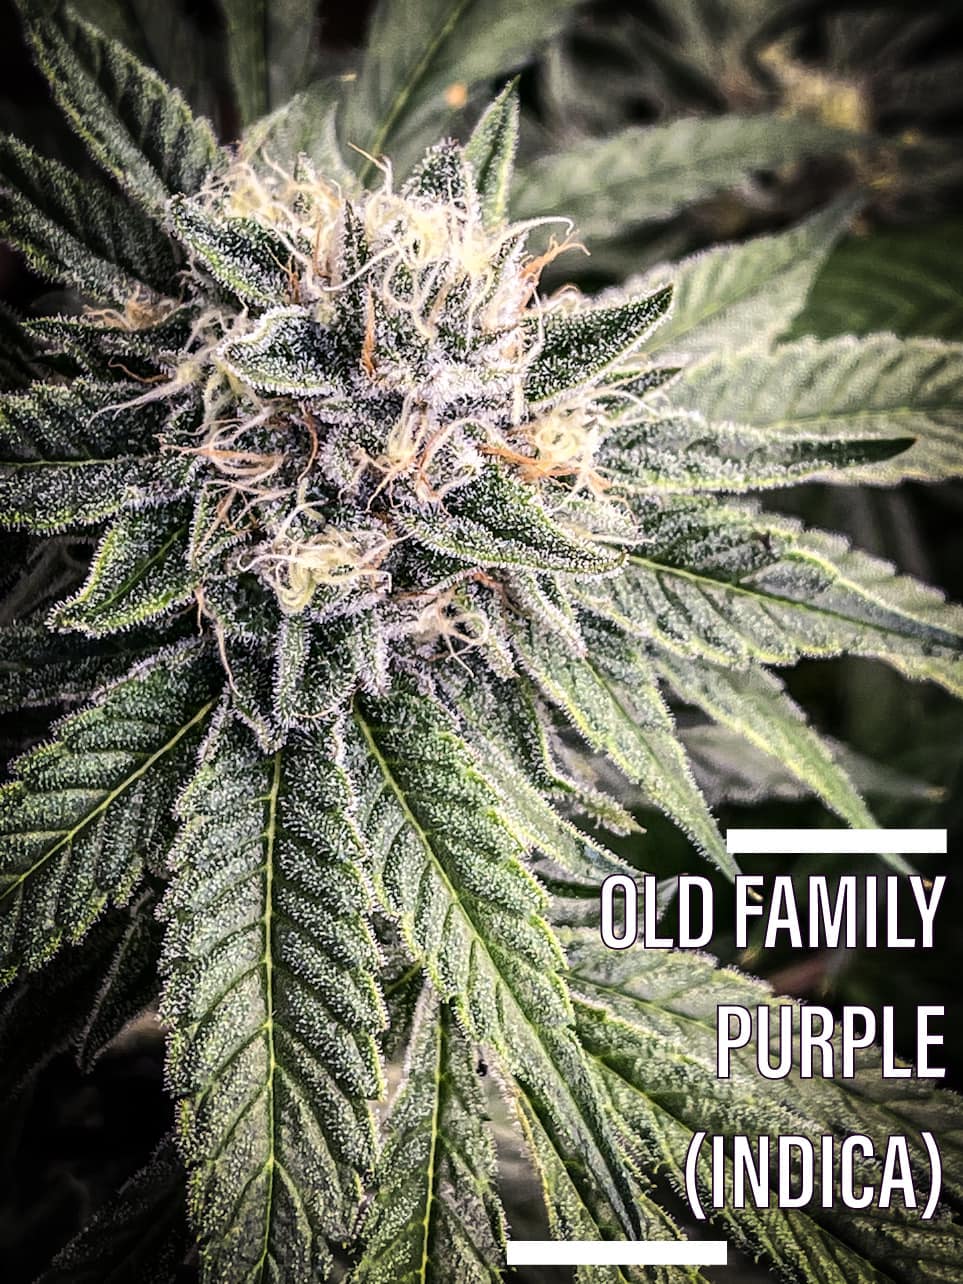 Old Family Purple painreliever dispensary tucson